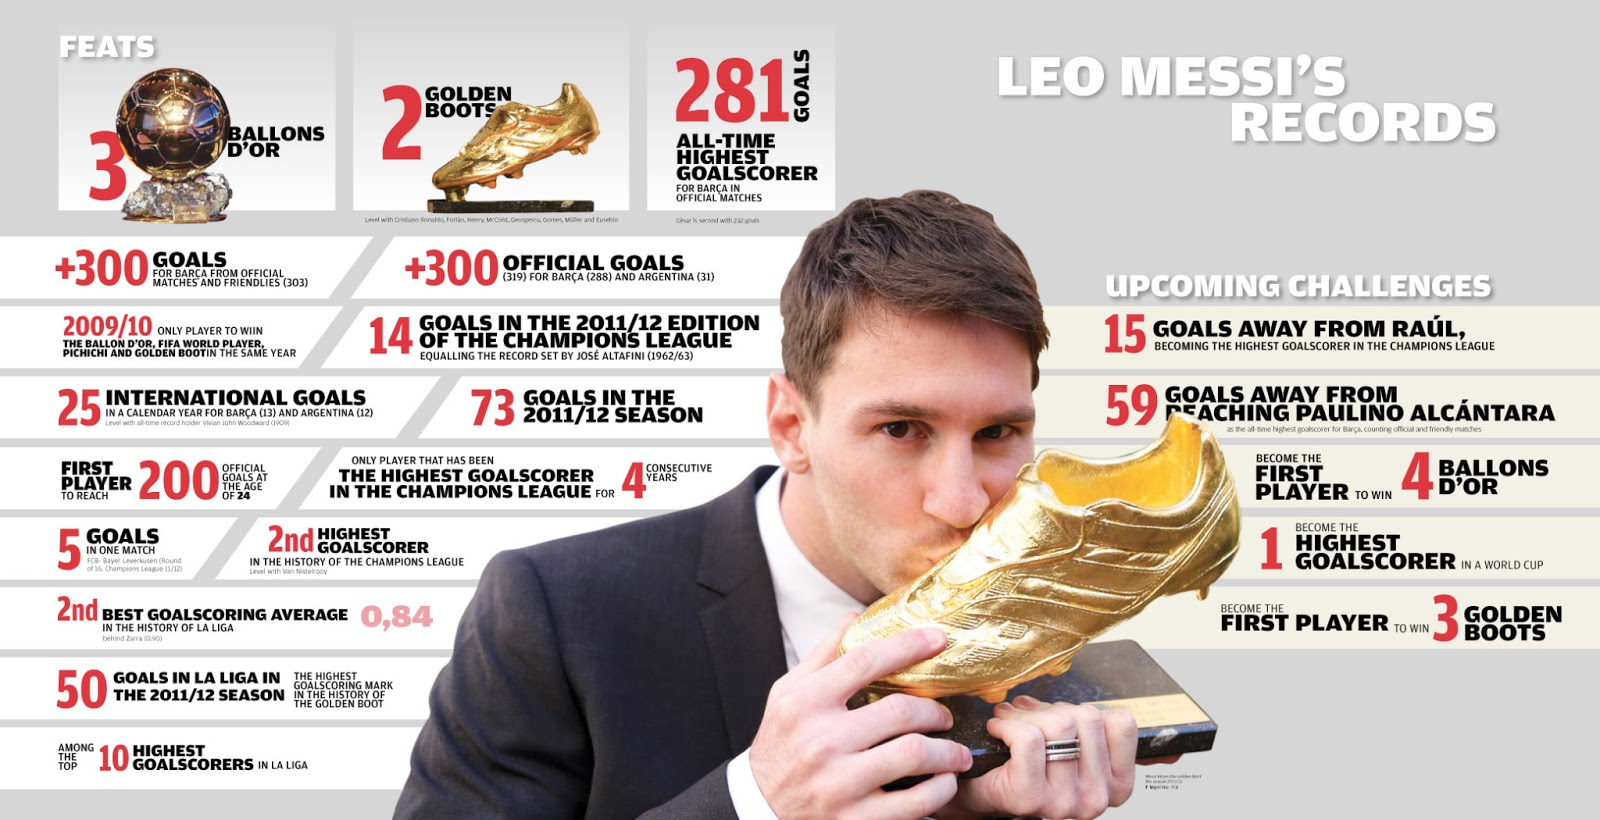 Kmhouseindia: Lionel Messi Creates Record For Most Goals with regard to Most Goals In A Calendar Year